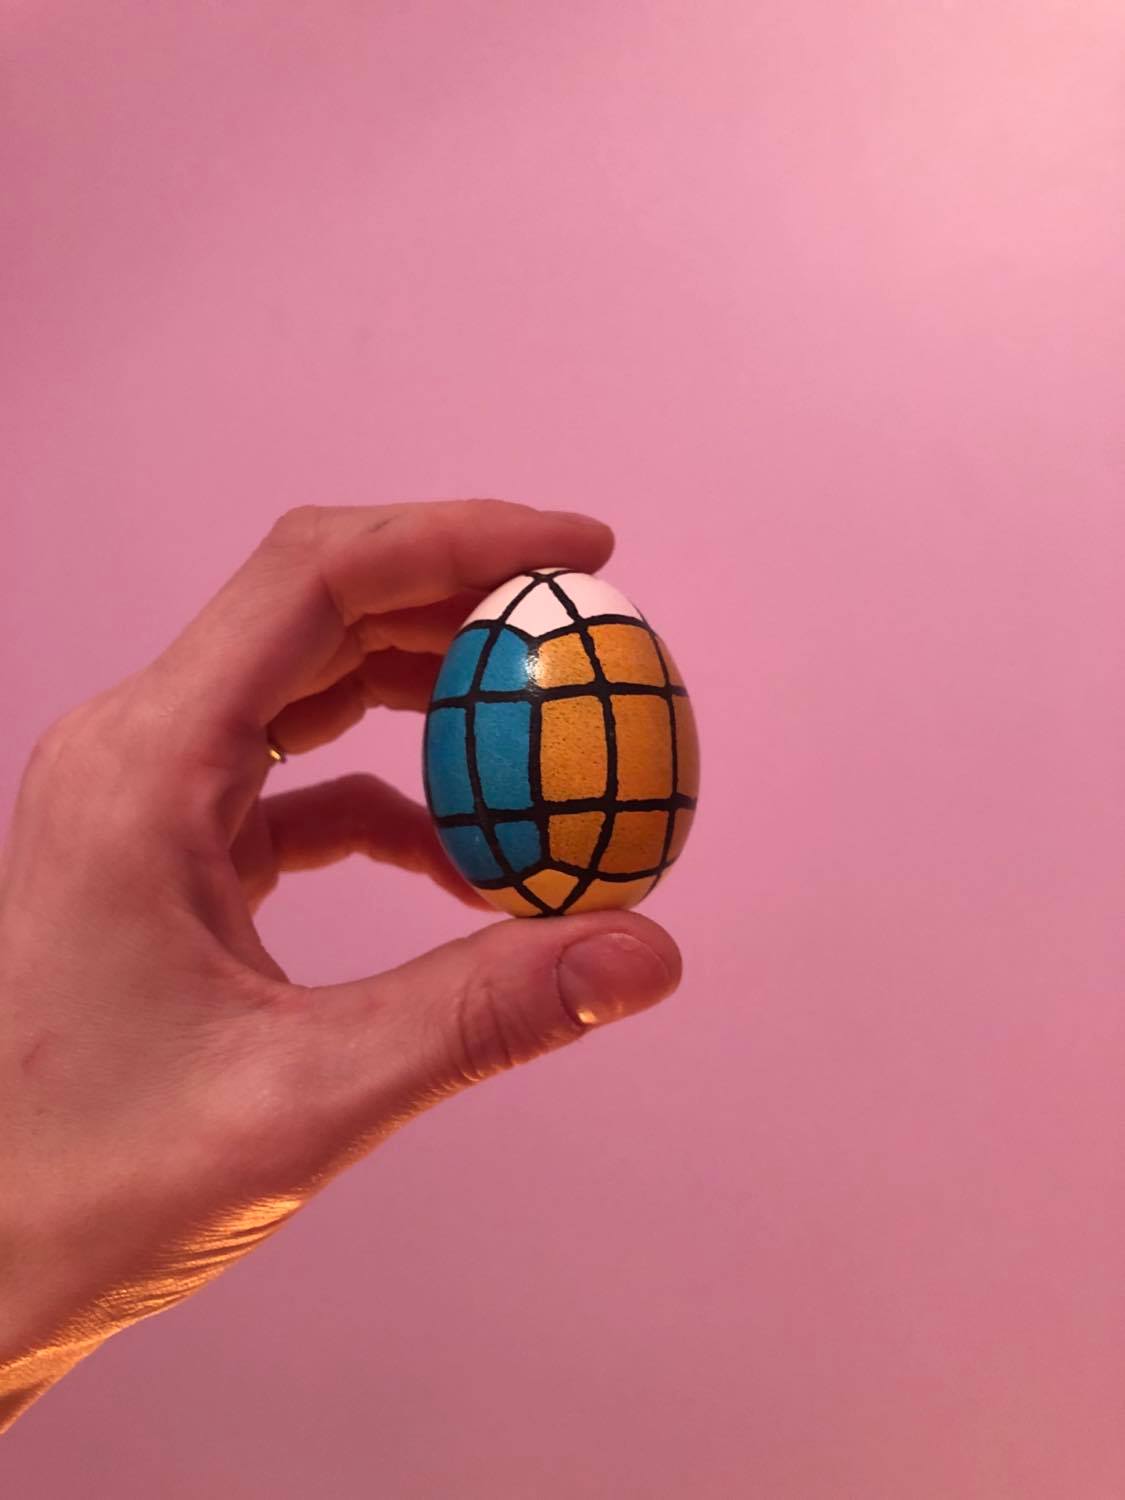 An egg with black linework and coloured squares, as though a rubik's cube had been stretched into the shape of an egg.